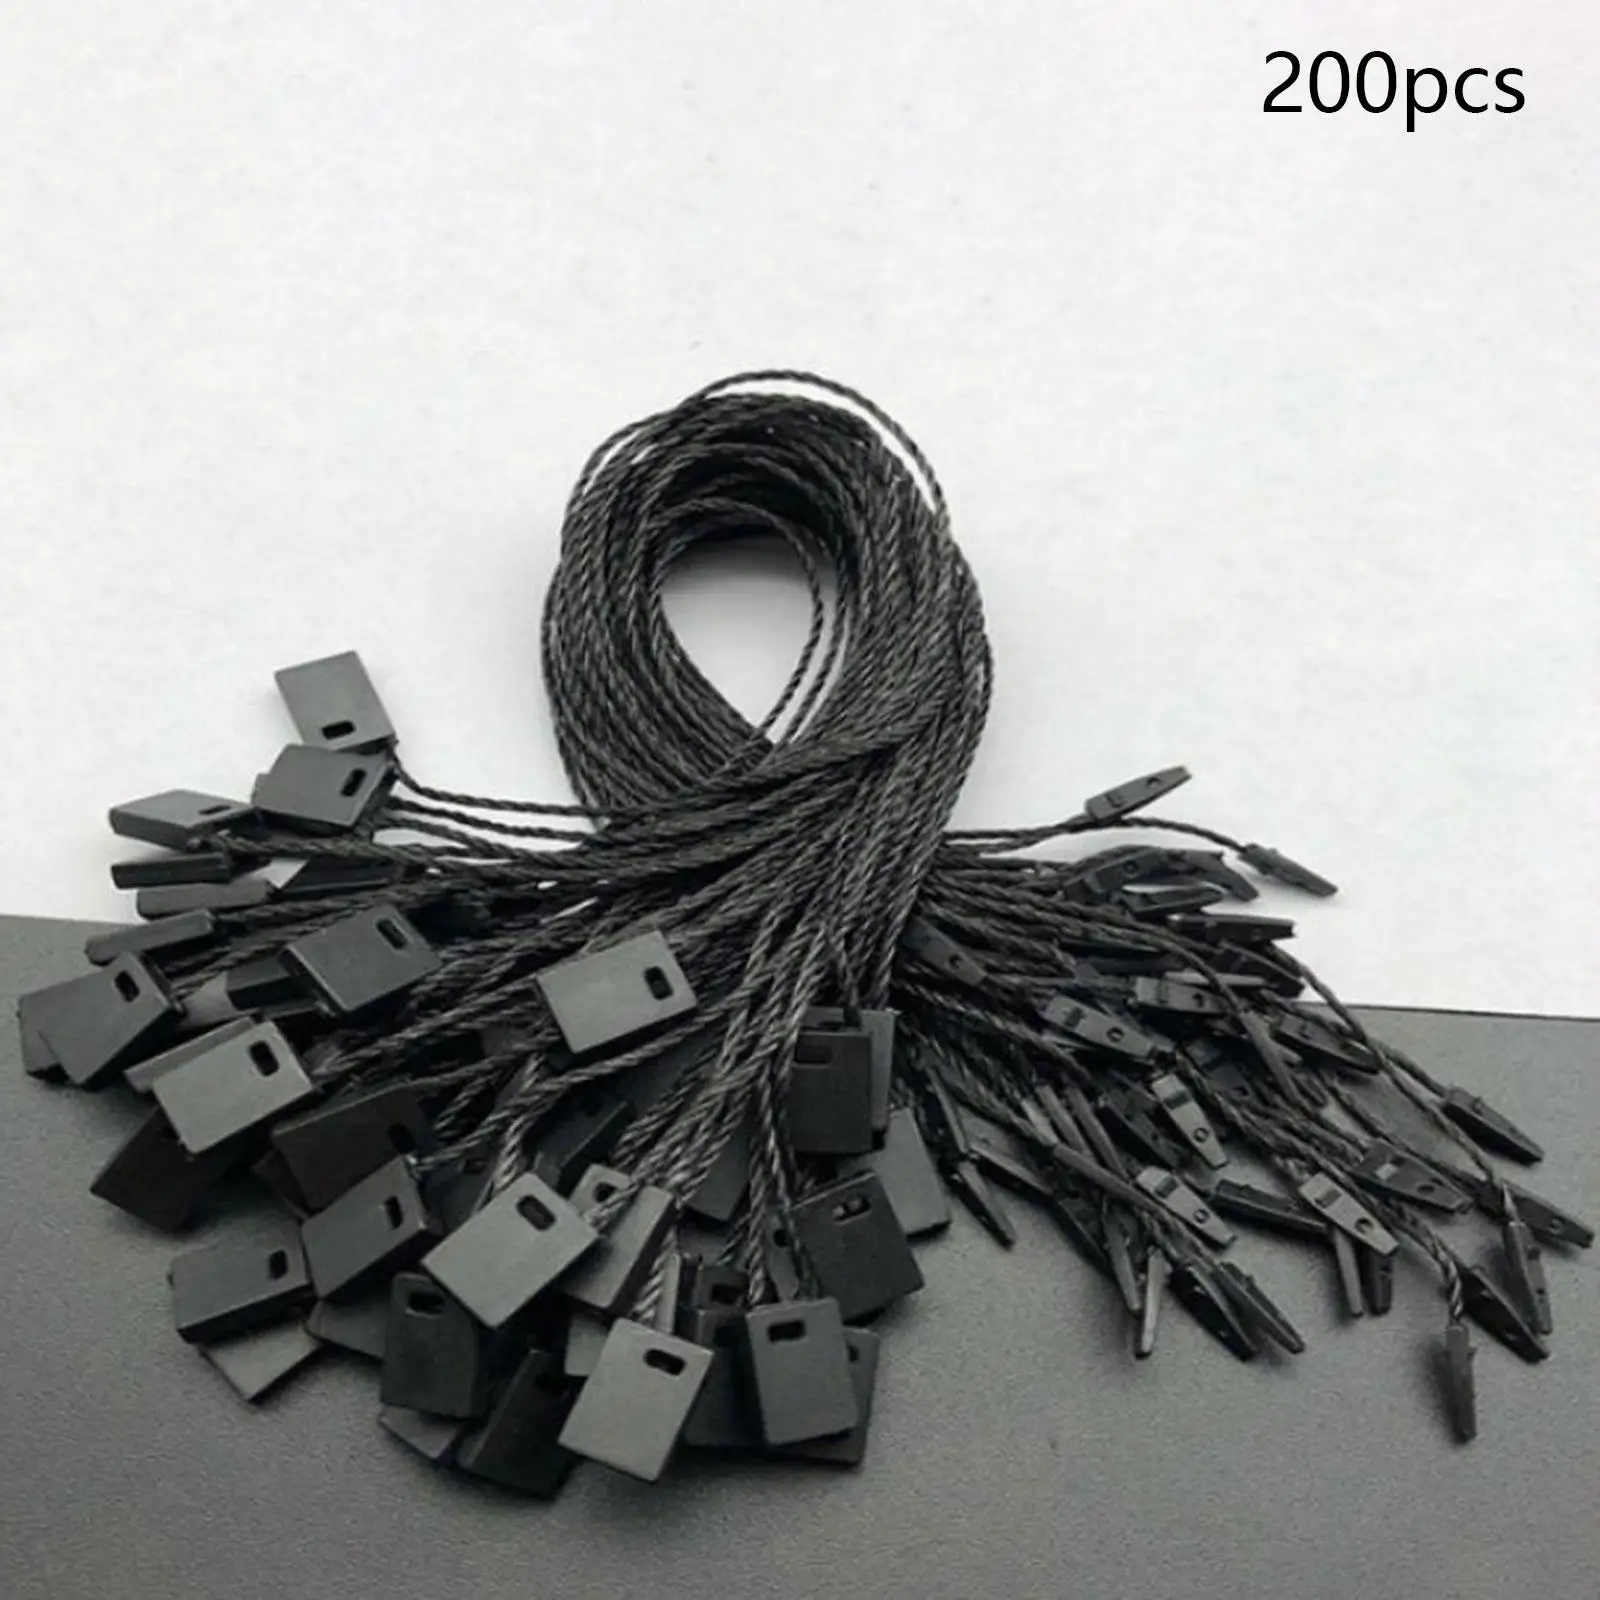 200Pcs Hang Tag Strings Craft Making Durable Fastener Hook Ties Clothing Tags Strings for Retail Luggage Garment Purse Gift Tags